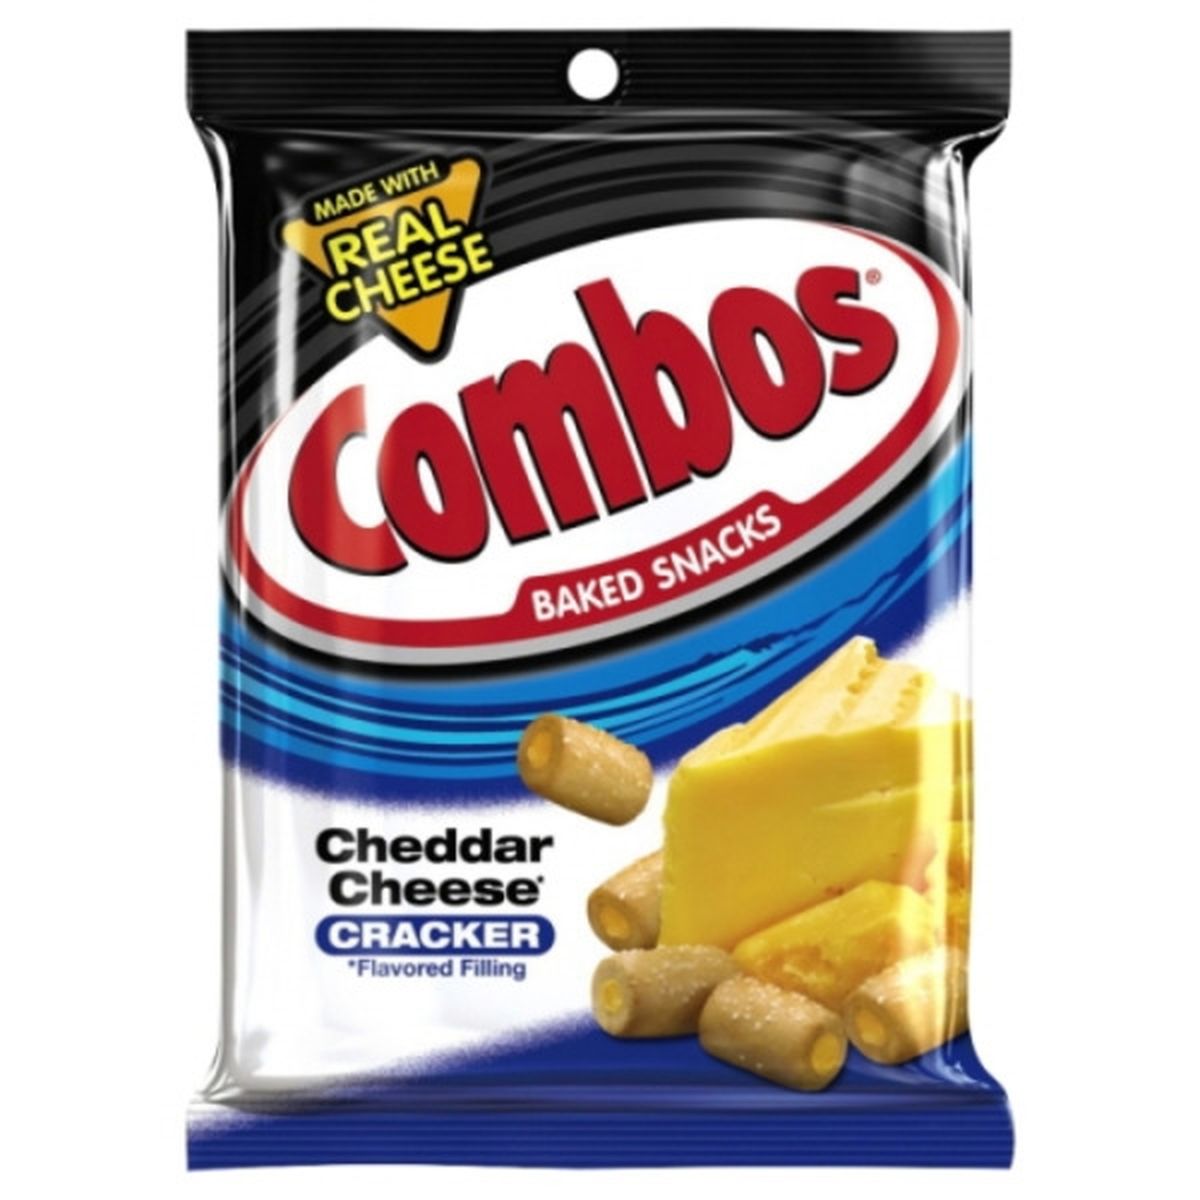 Calories in Combos Baked Snacks, Cheddar Cheese Cracker Flavored Filling